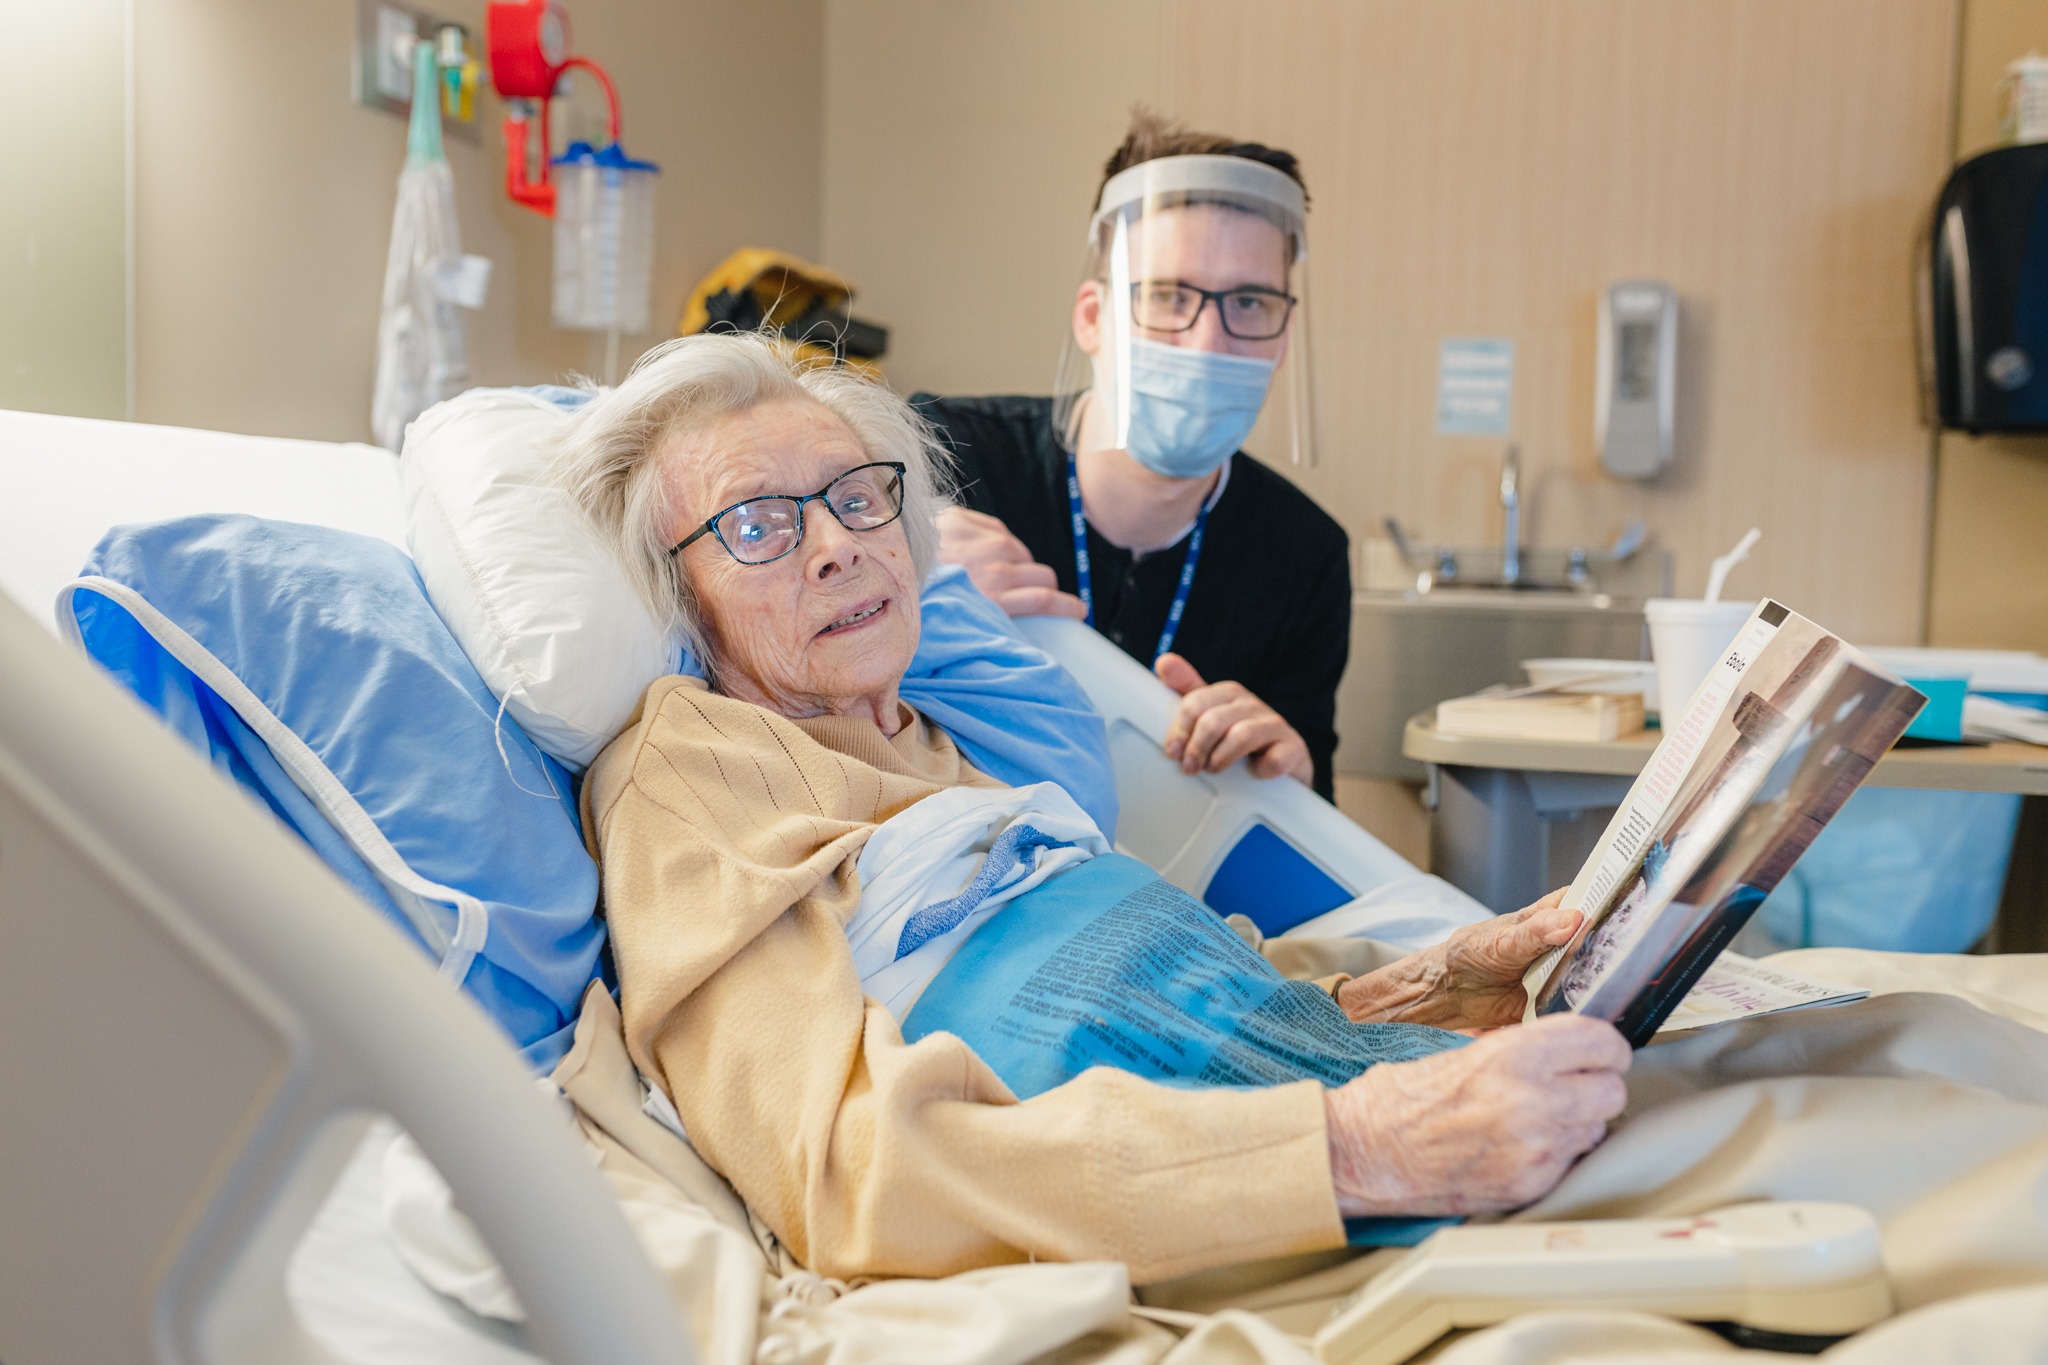 Malise Lynch smiles at the camera from her hospital bed. Elder life specialist Chris Gabor sits beside her wearing personal protective equipment.